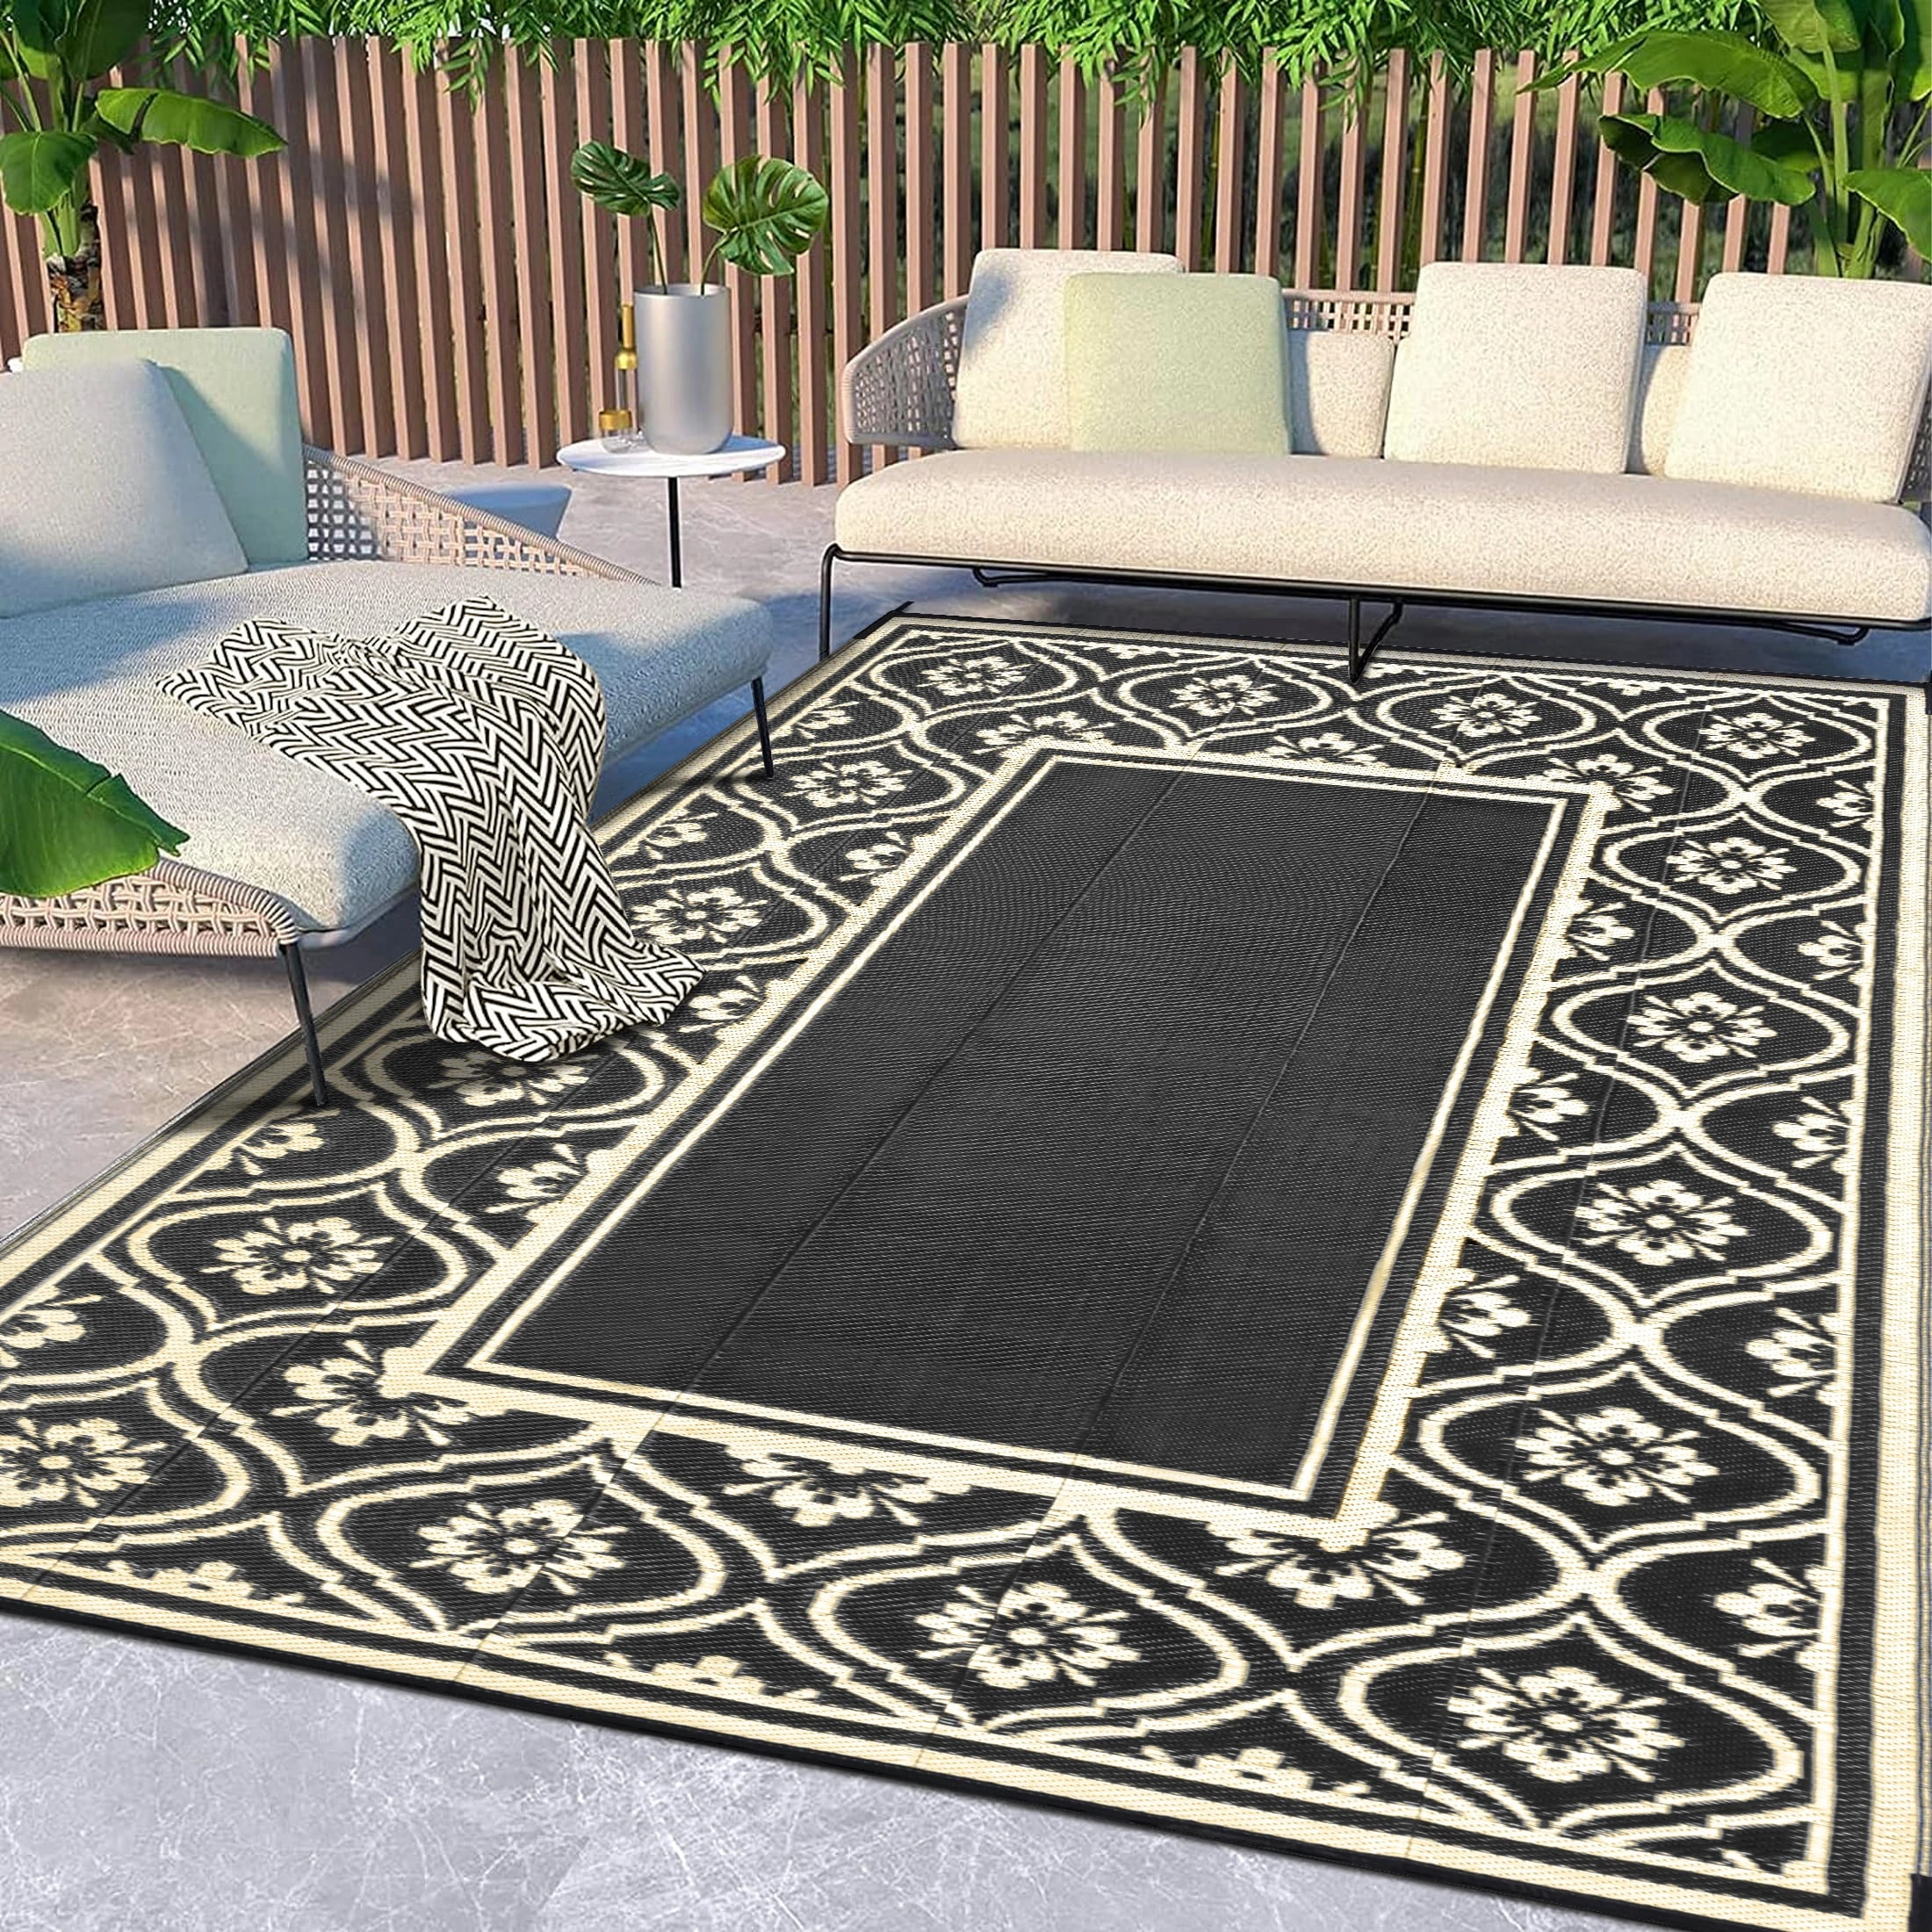 Wonnitar Outdoor Plastic Straw Rug 5x8,Reversible Waterproof Outdoor Rugs  for Patio Clearance,Large Tropical Deck Mat,Portable Porch Floor Carpet for